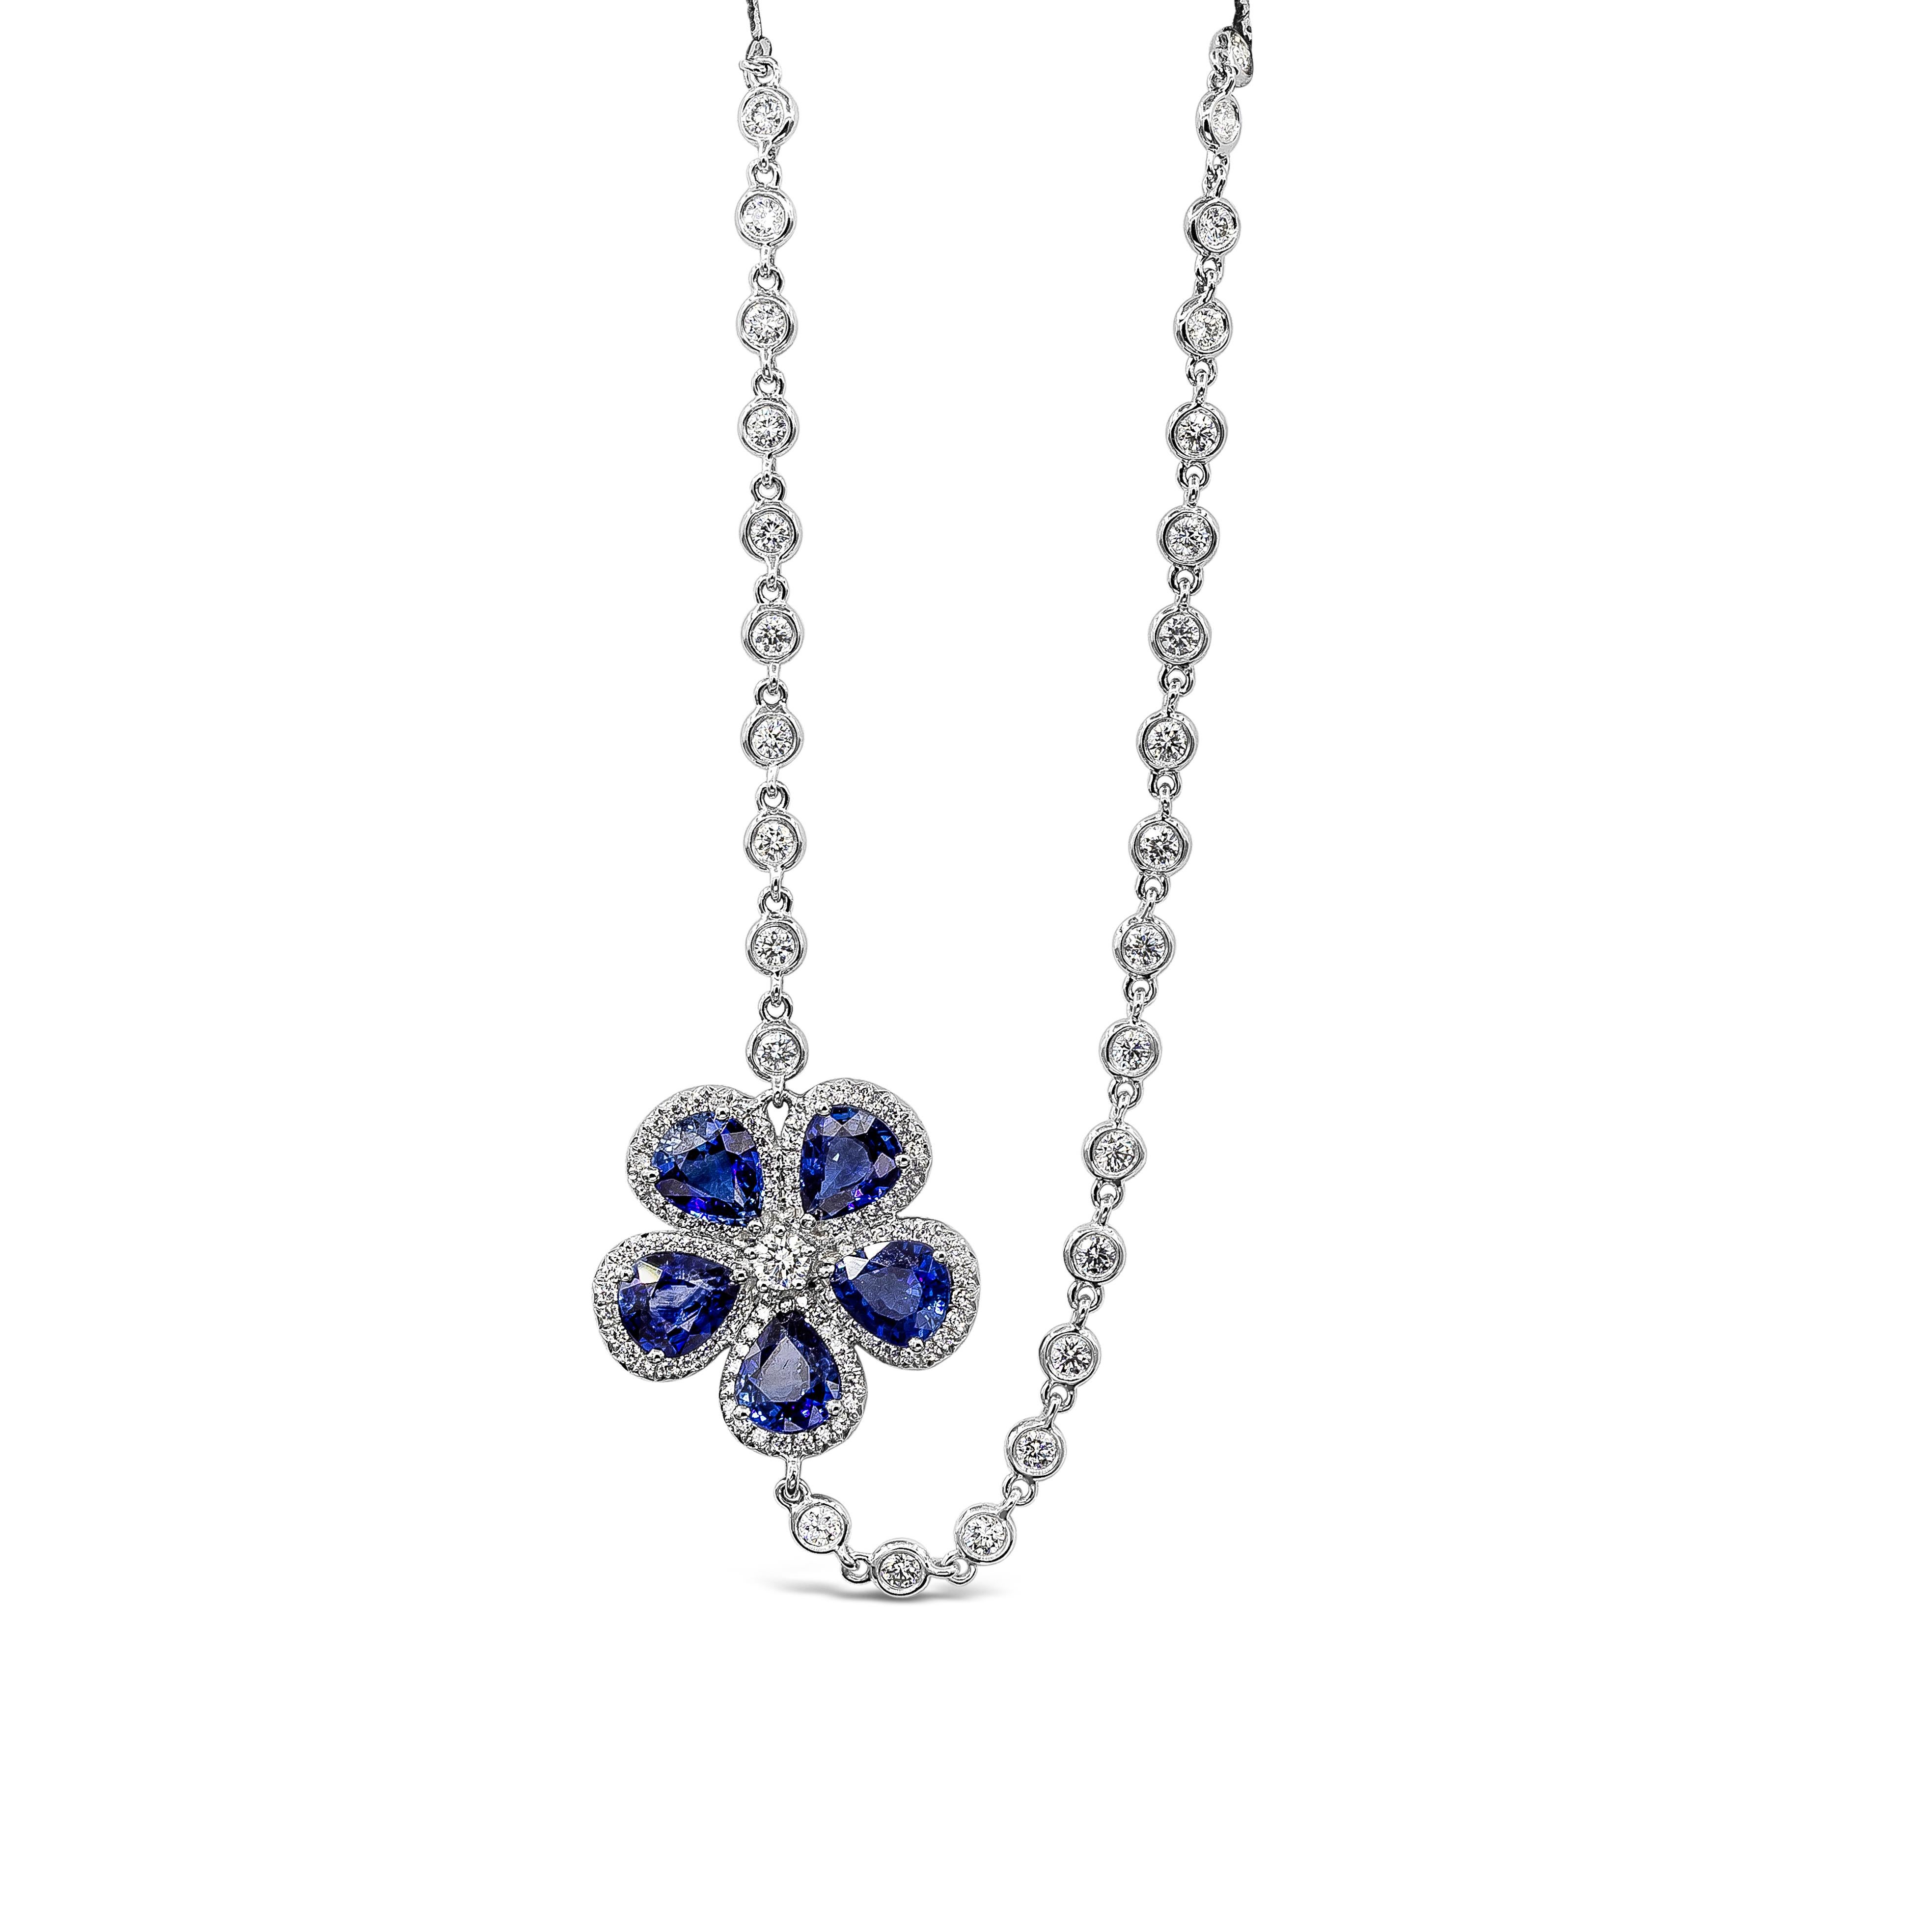 A fashionable and beautiful long necklace showcasing a row of bezel set round diamonds weighing 4.76 carats total. Accented with a flower made of pear shape blue sapphires, finished with brilliant diamond edges. Sapphires weigh 5.89 carats total.